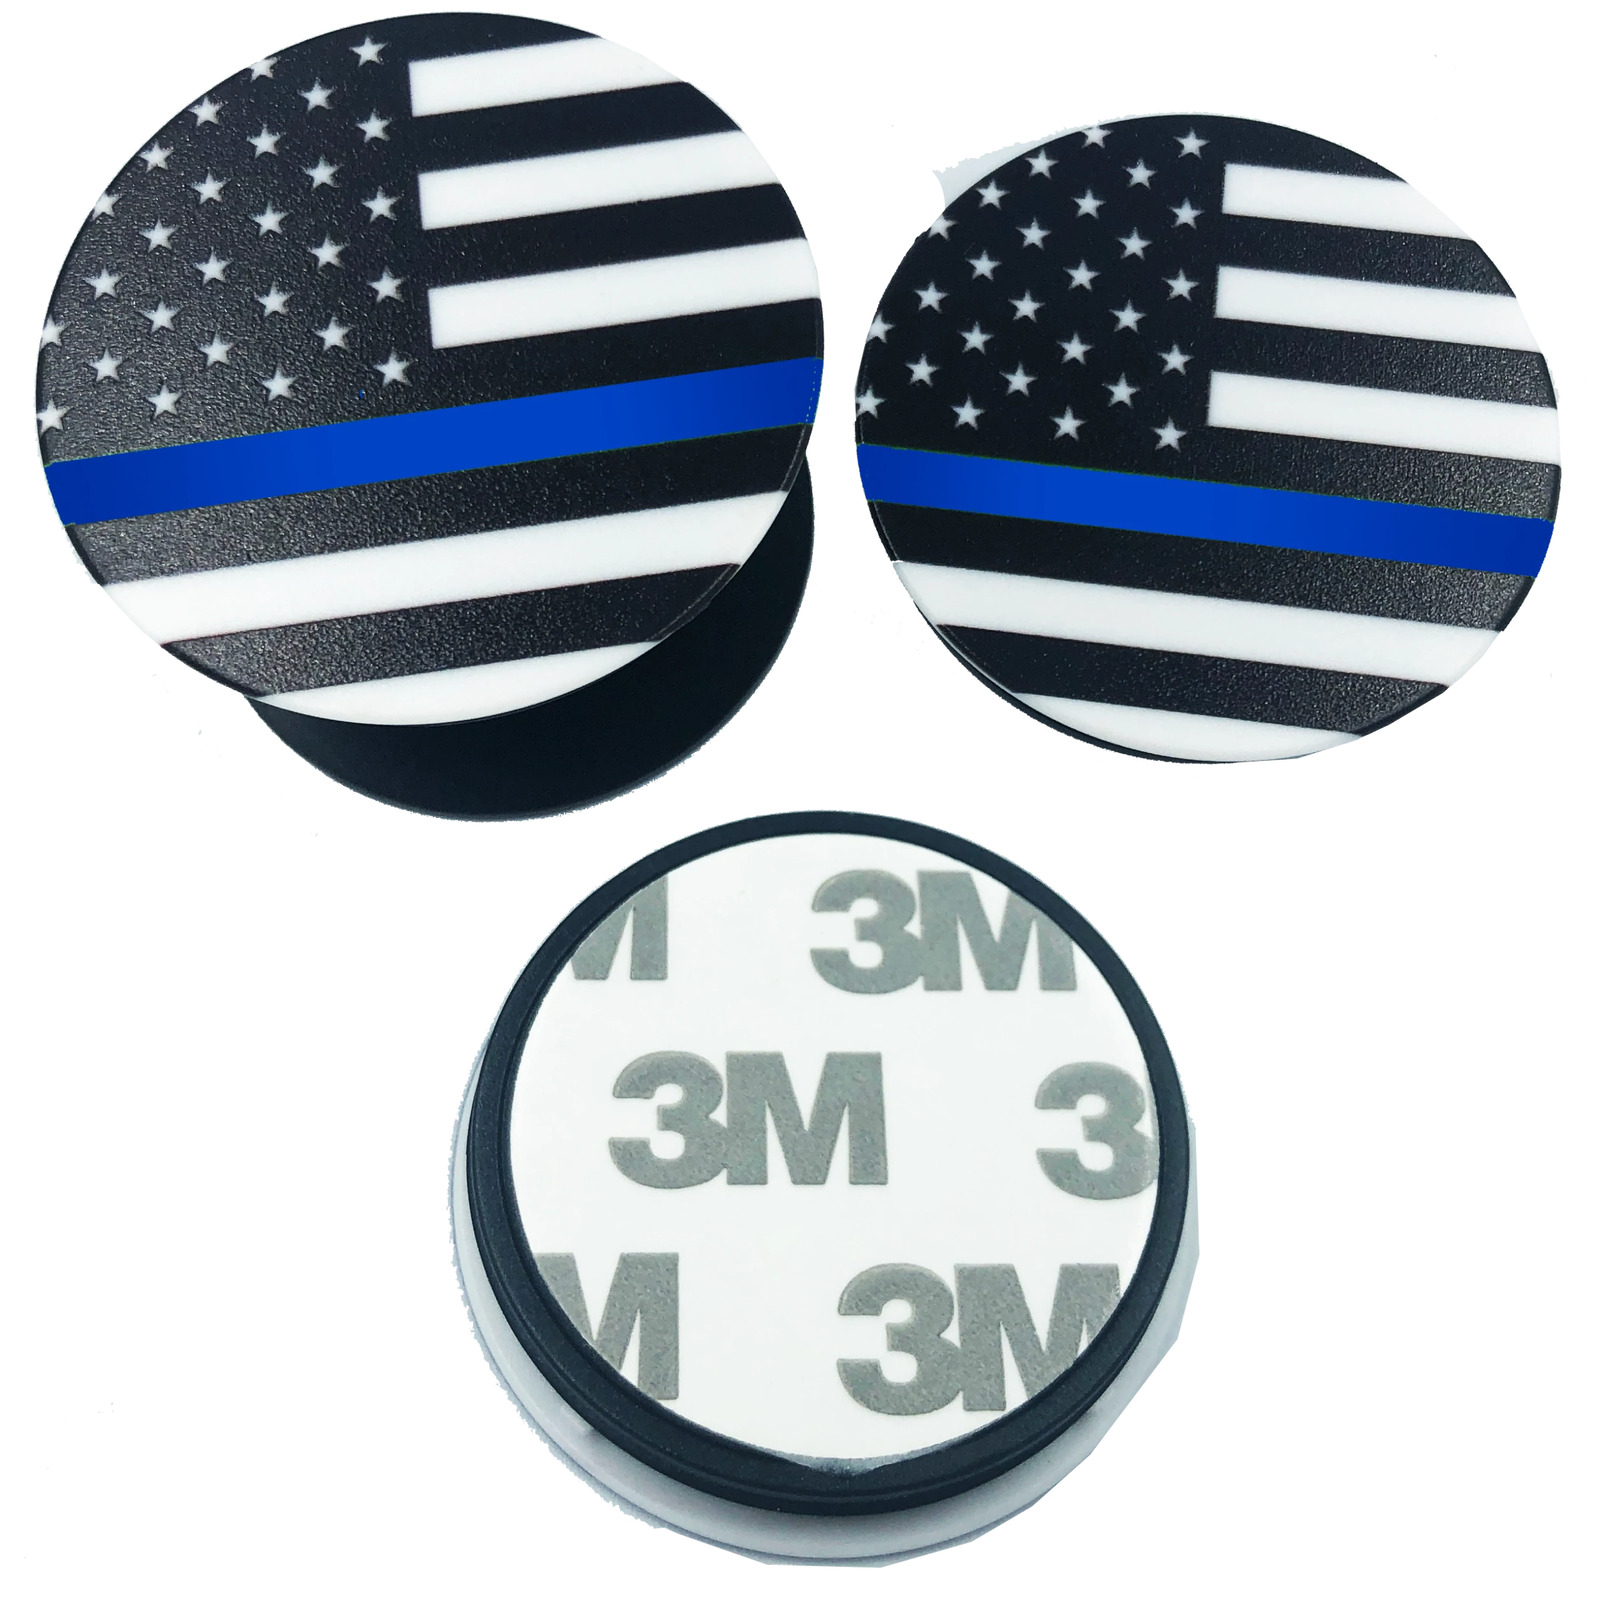 Thin Blue Line pop open cell phone holder iphone android ipad smart phone police